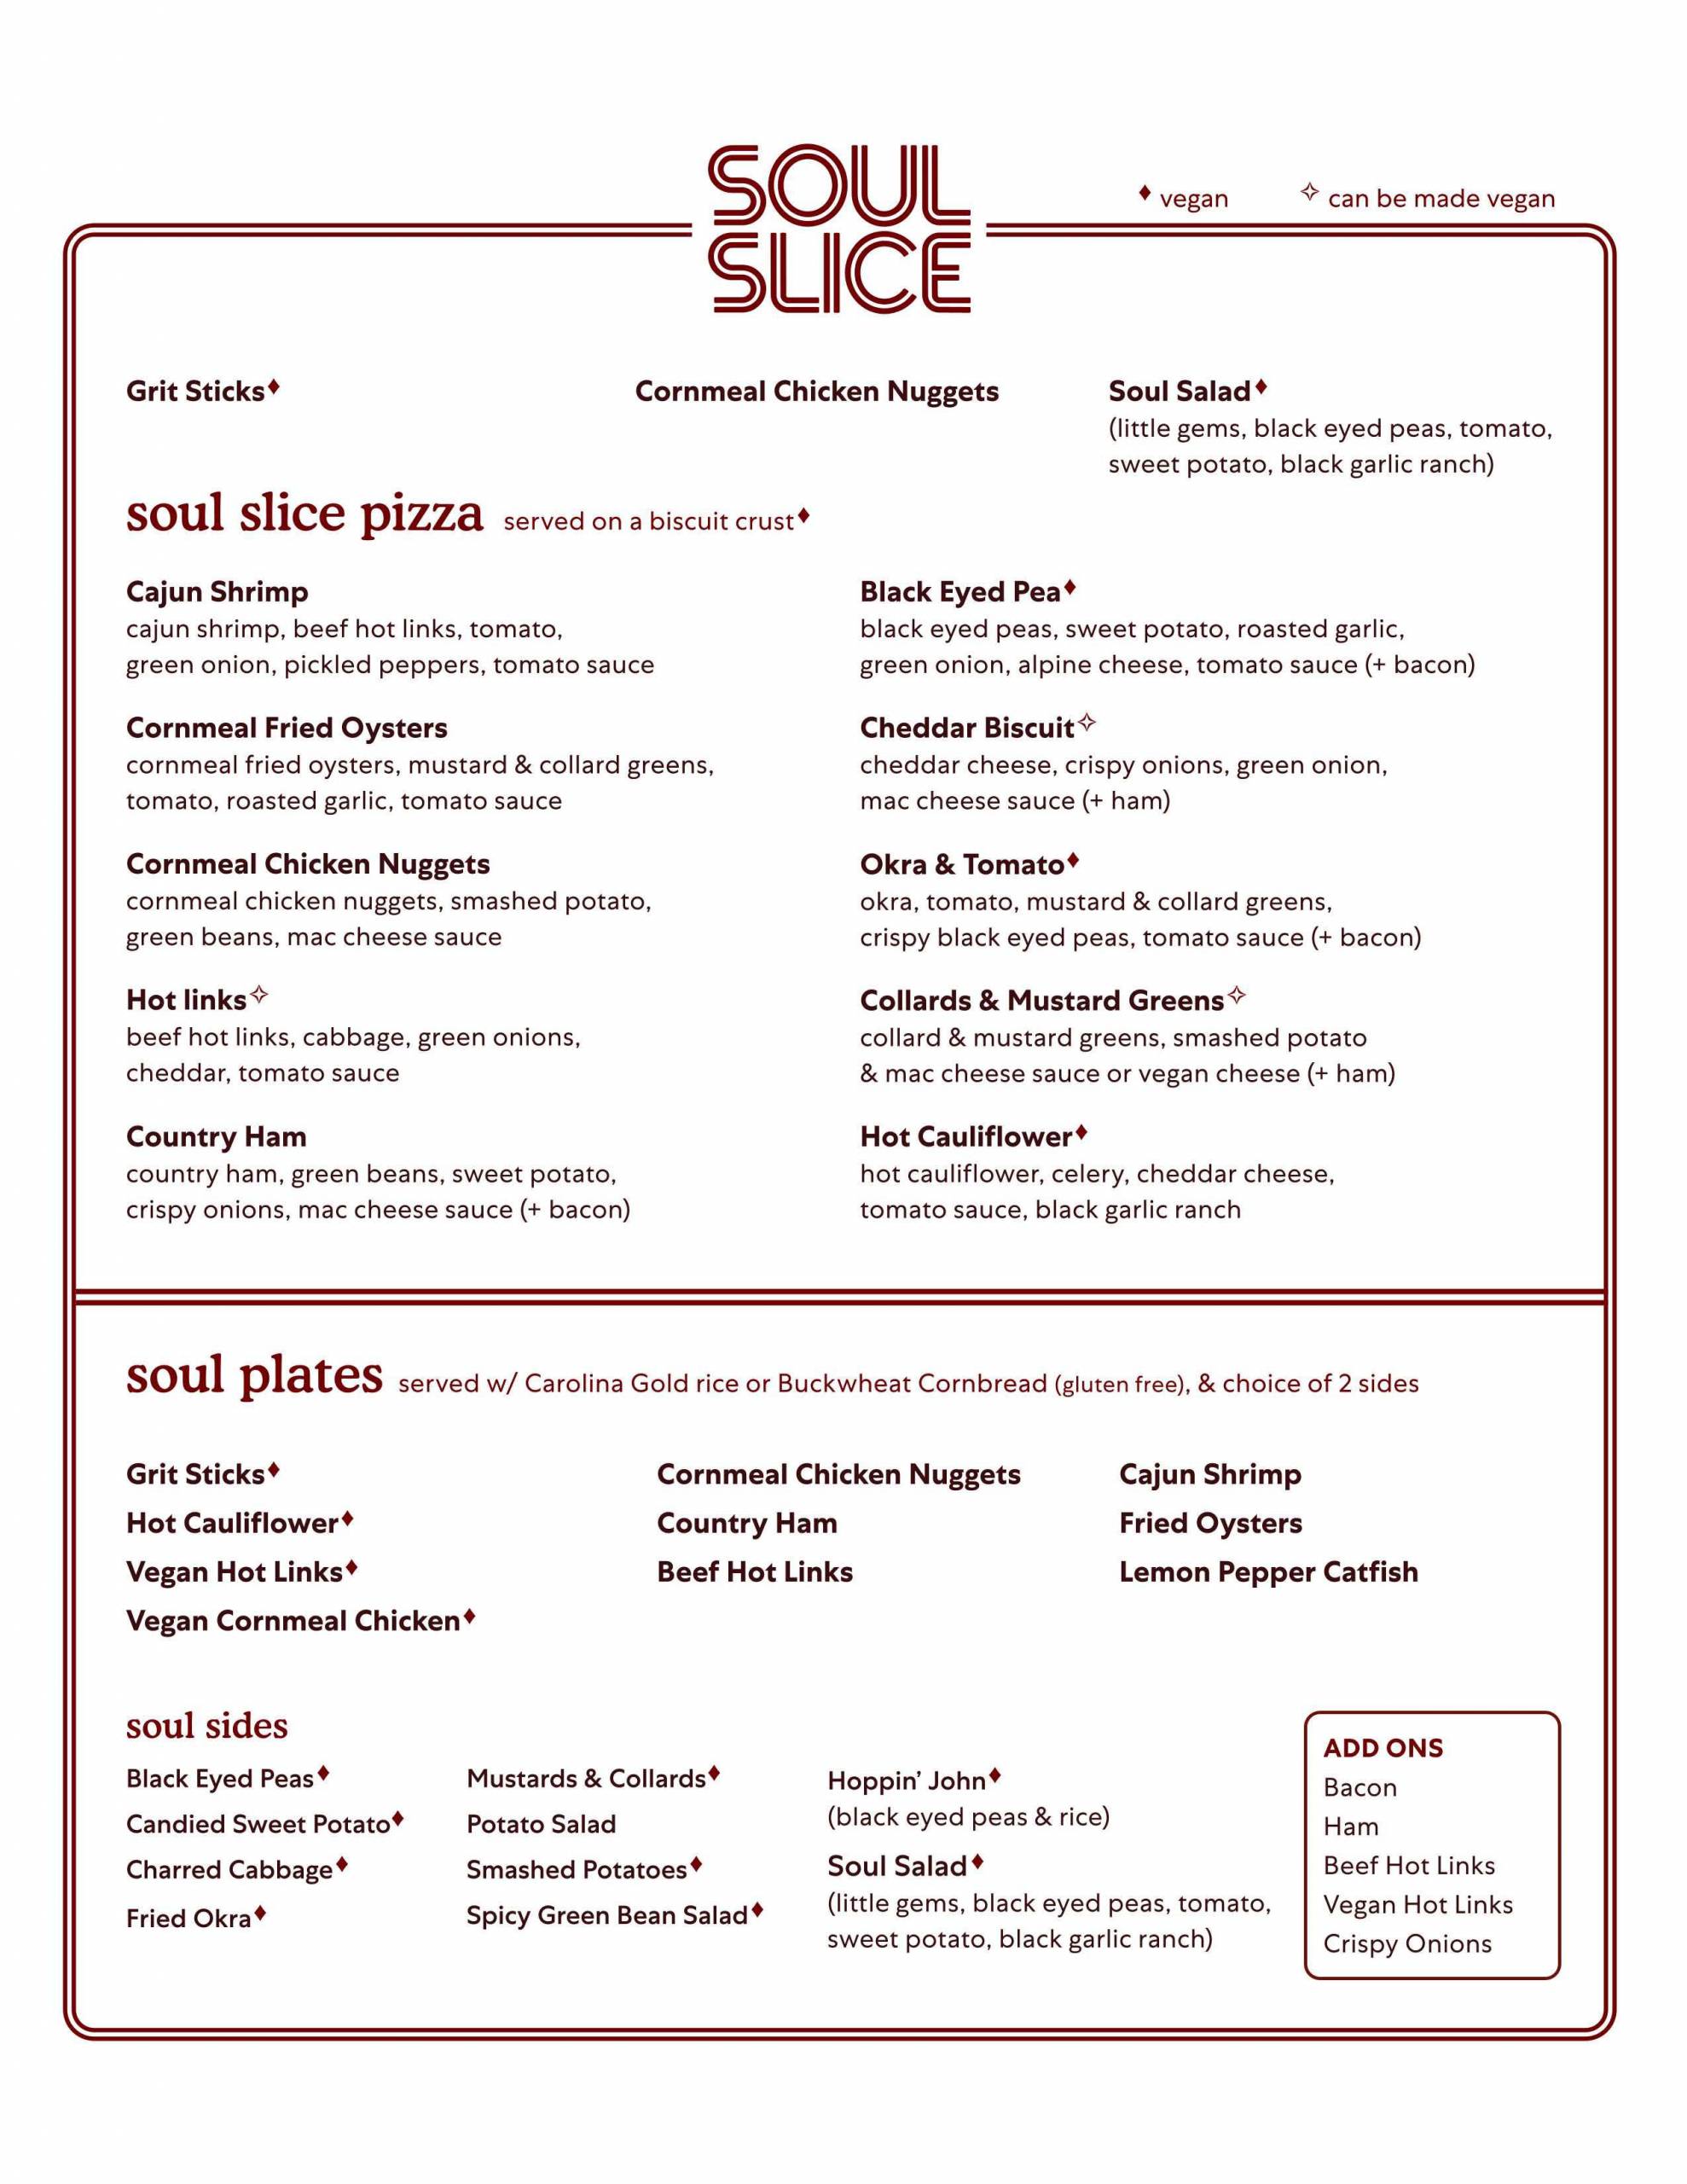 The first page of the Soul Slice menu.